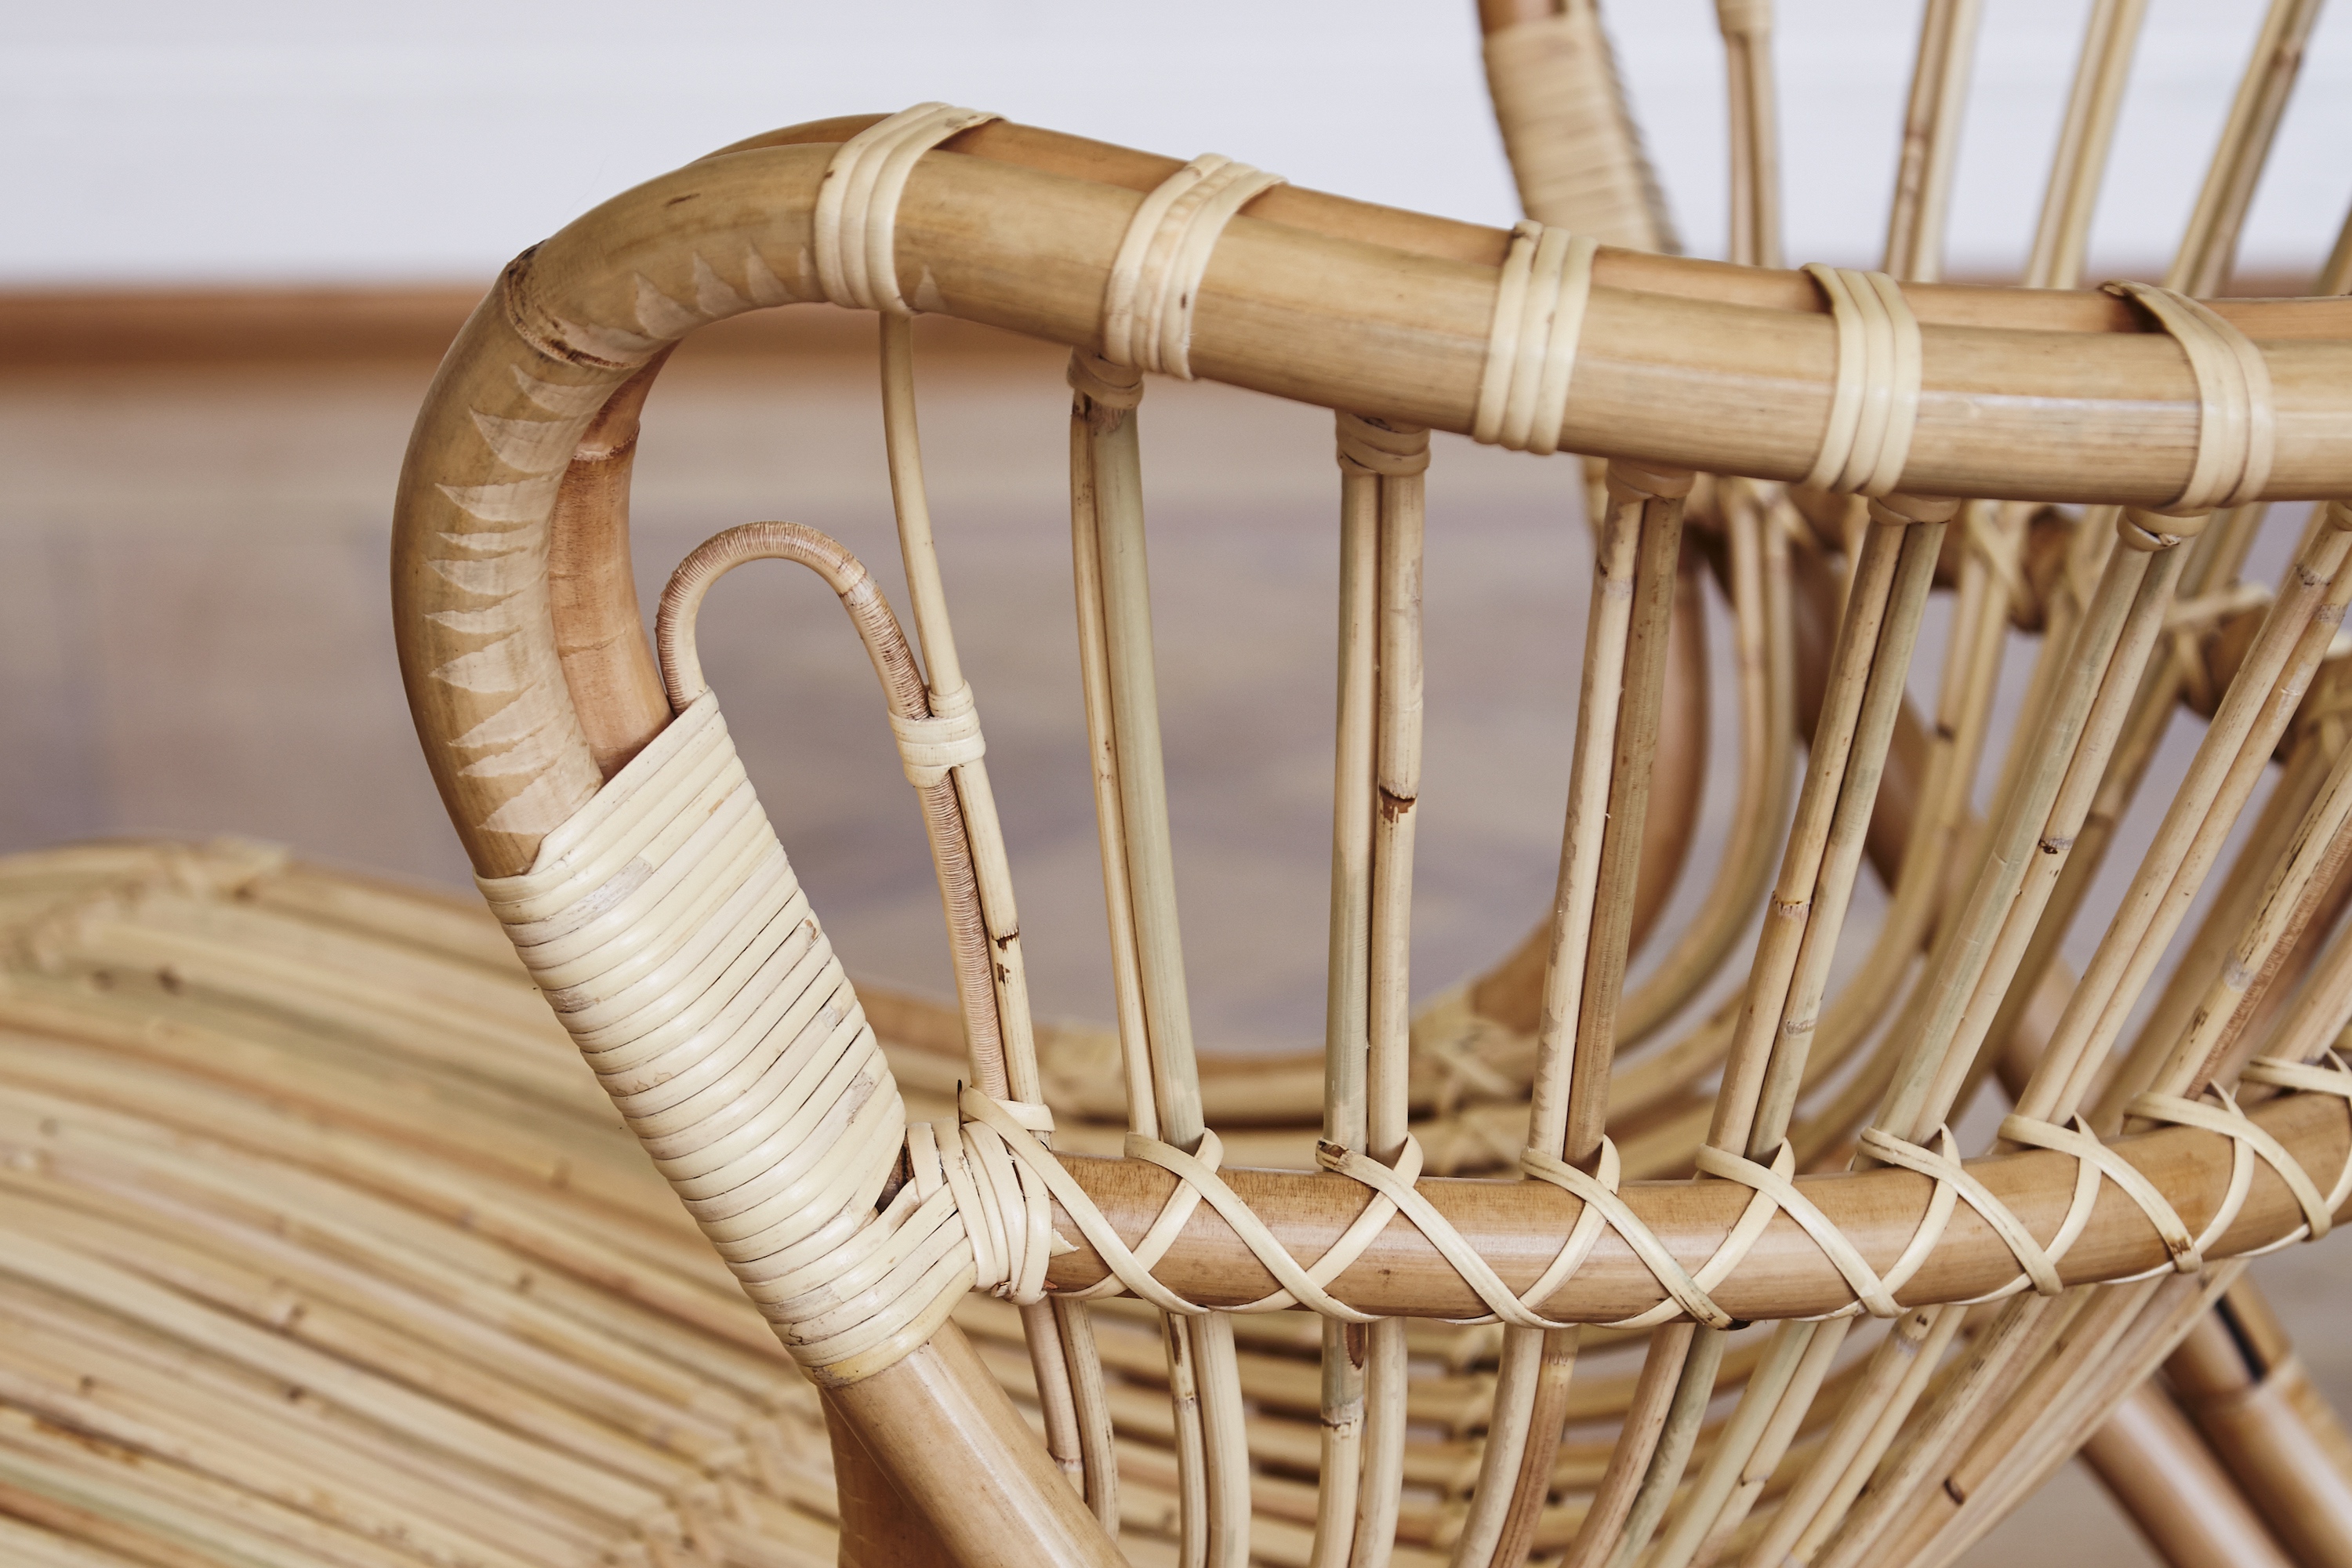 What's the Difference Between Wicker and Rattan?